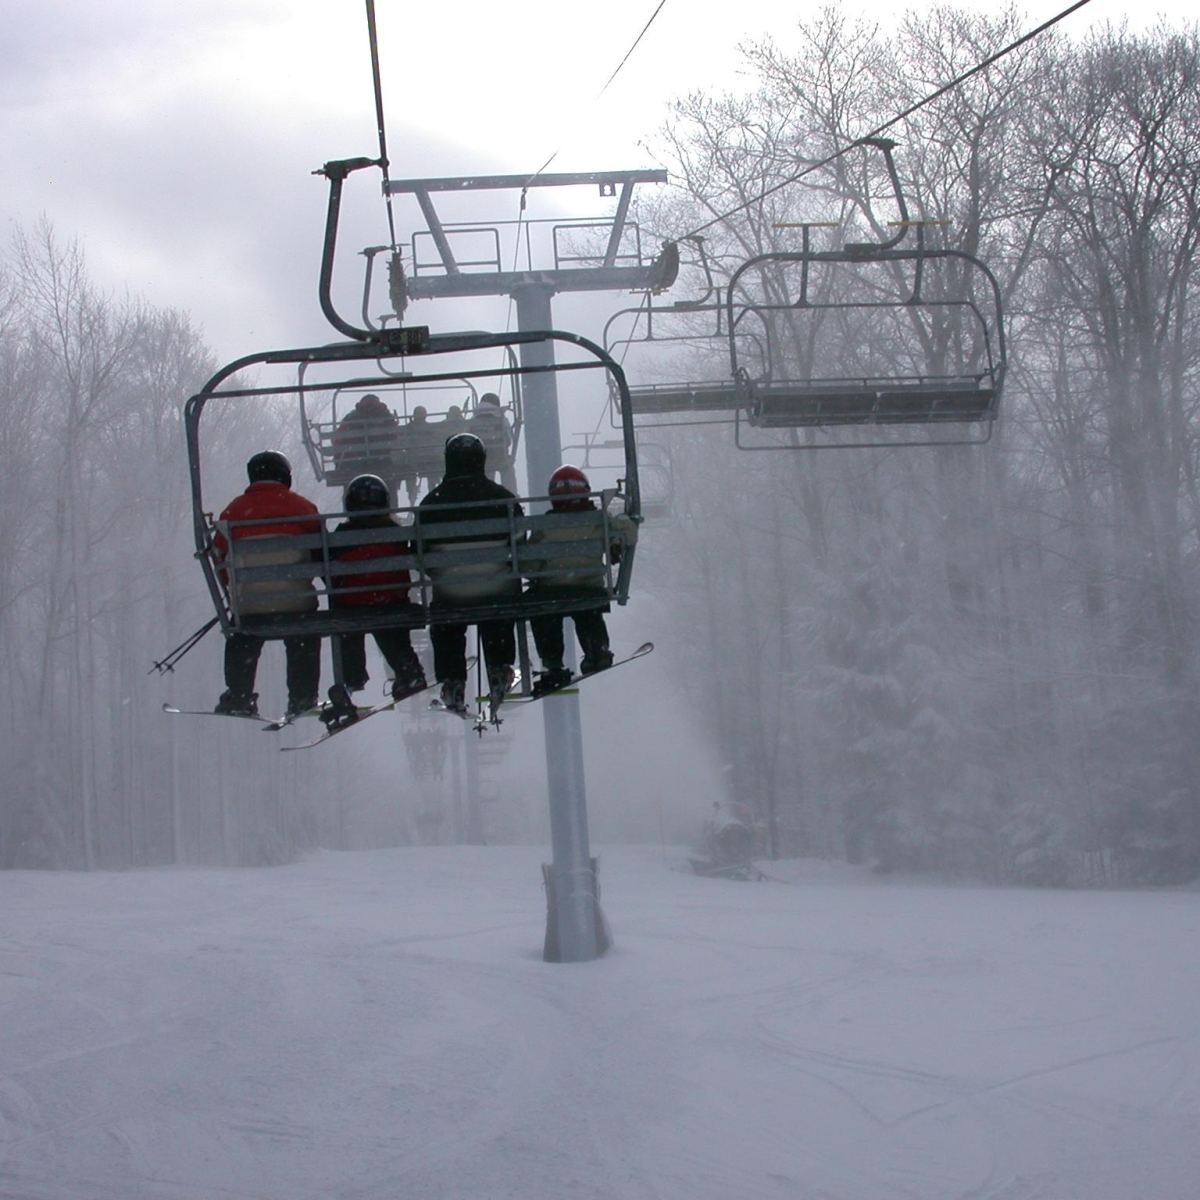 Group riding up the chairlift at HoliMont